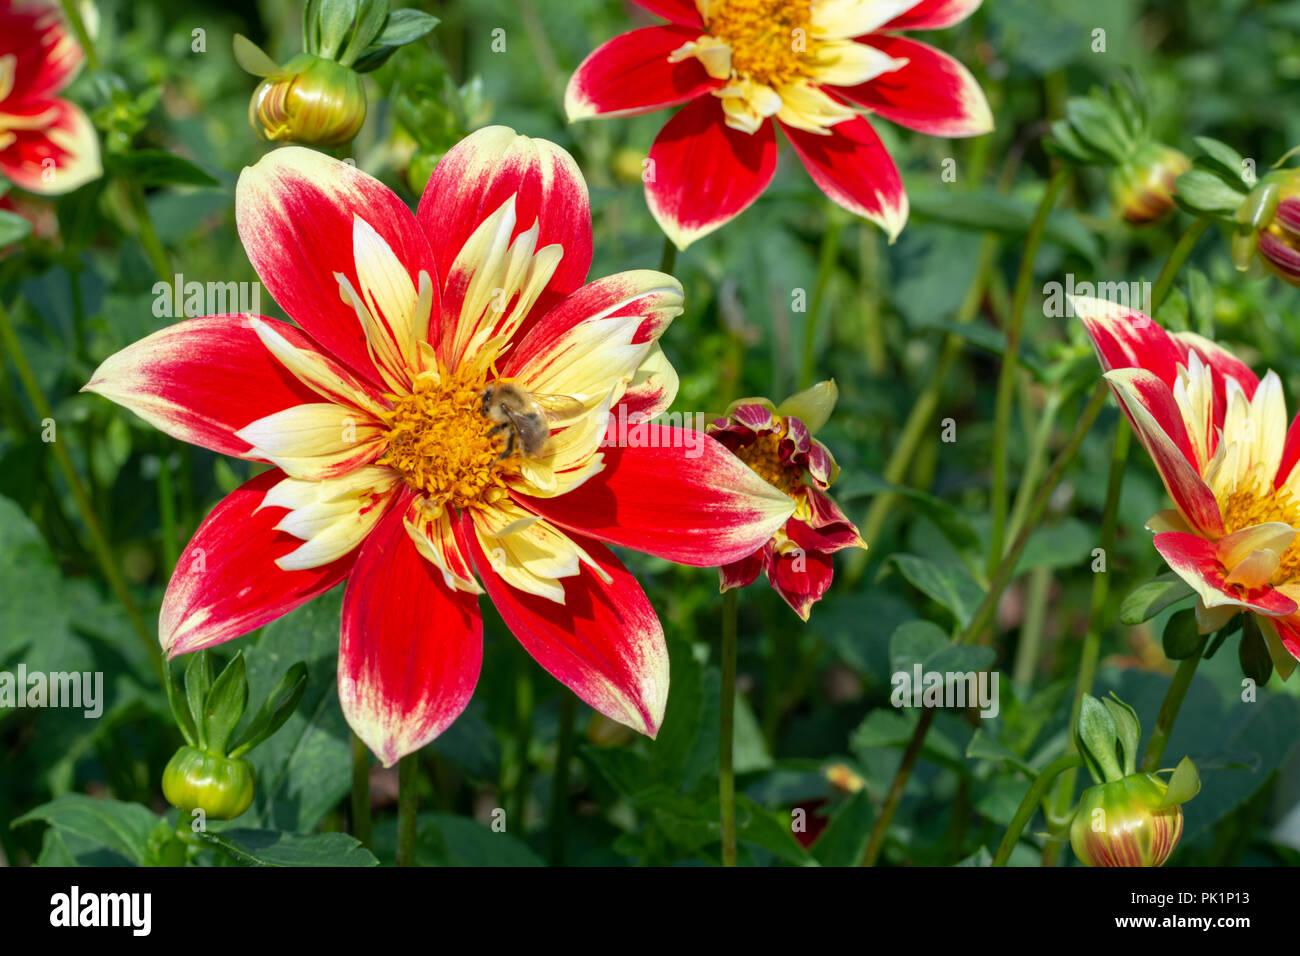 Big colorful round flowers of dahlia plant in garden close up Stock Photo